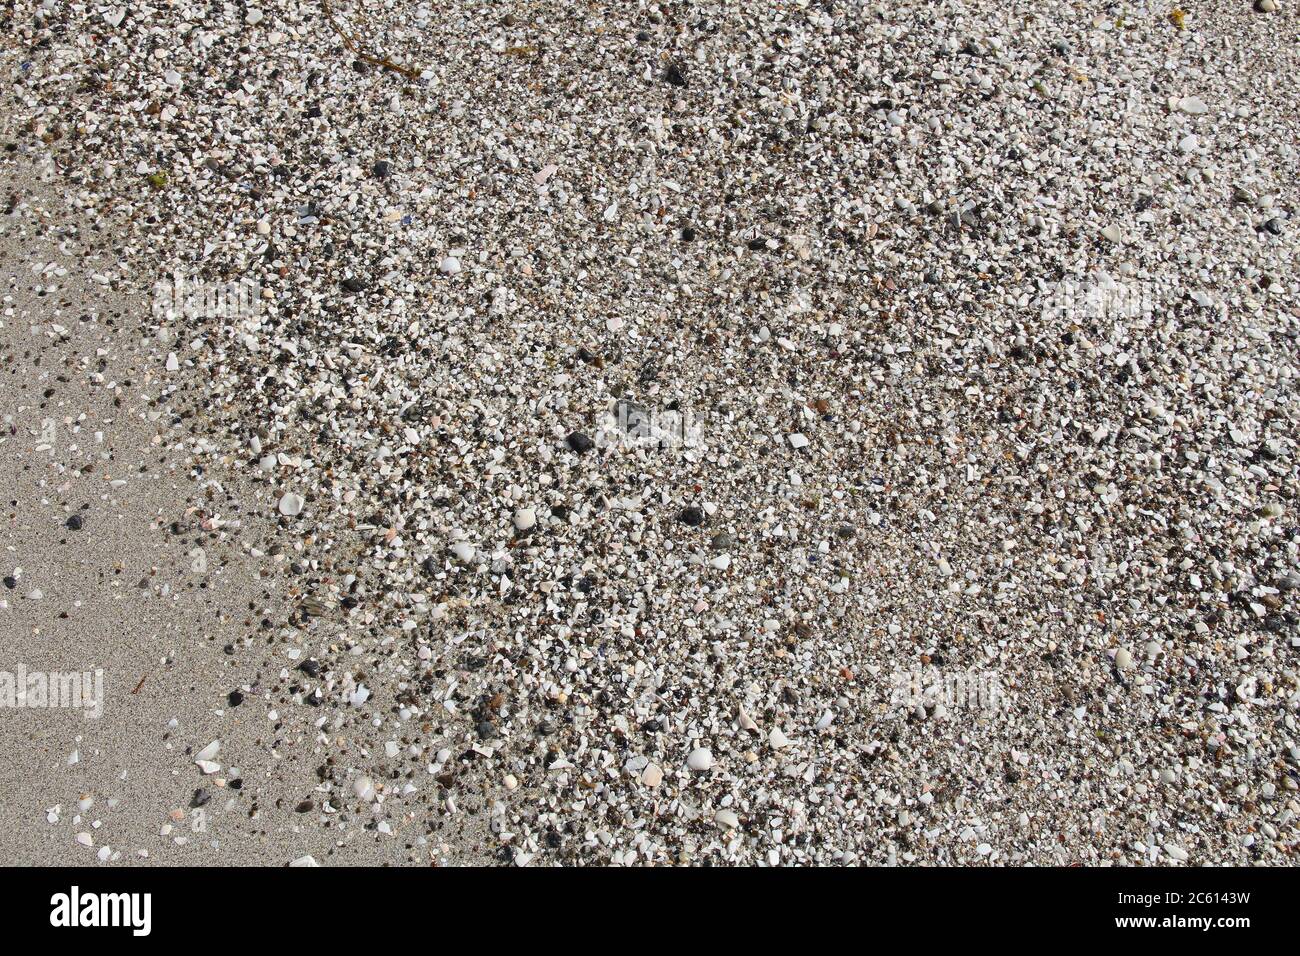 Beach sand with shell pieces - sandy coast in Norway. Background texture. Stock Photo